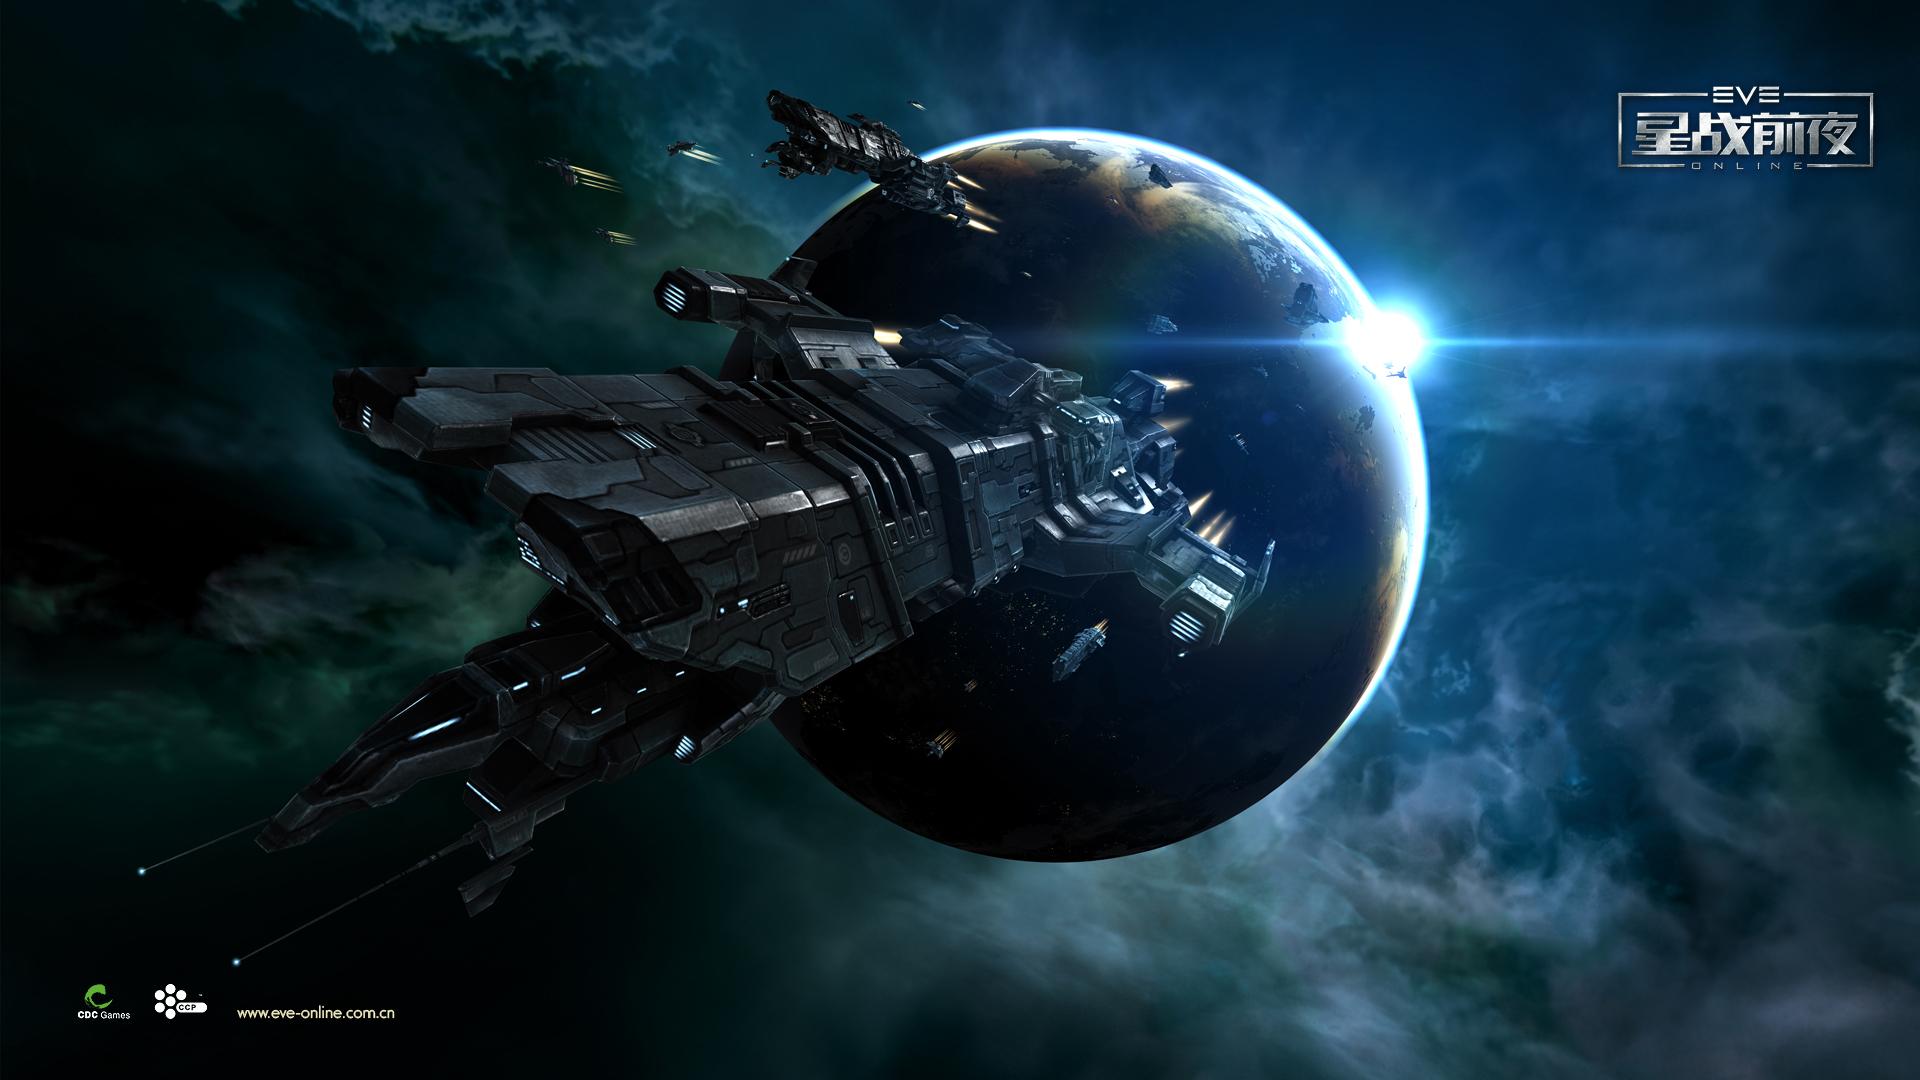 eve online wallpaper,outer space,spacecraft,space,astronomical object,space station